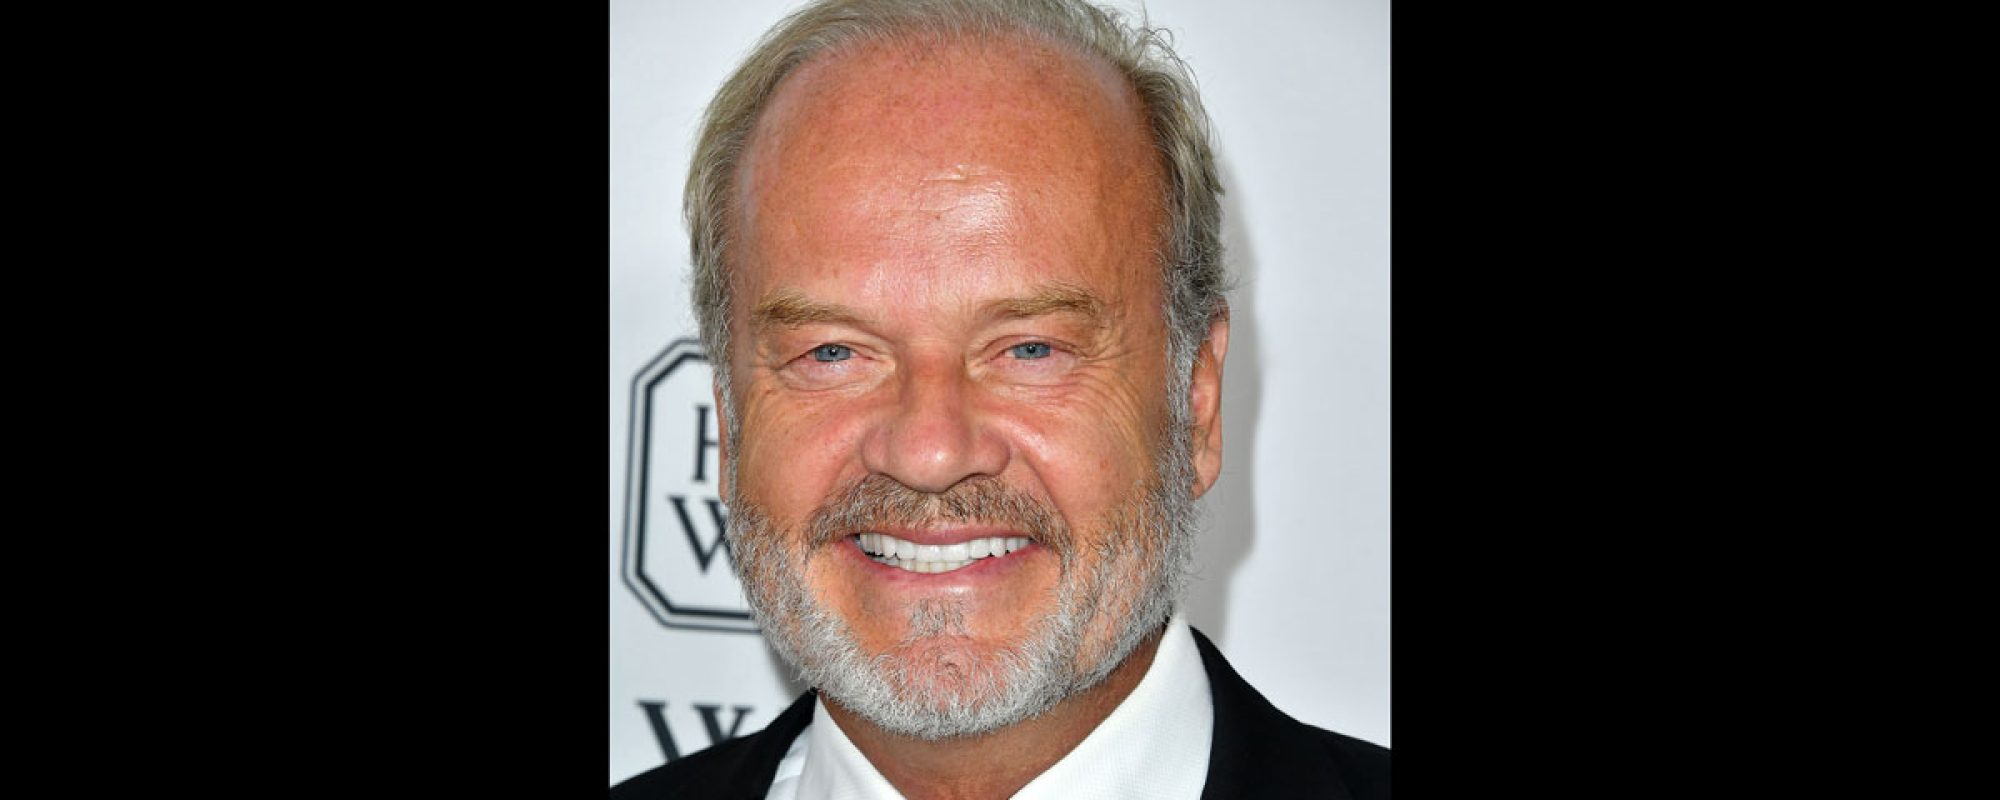 KELSEY GRAMMER JOINS ALEC BALDWIN AND JANE LYNCH AS HOSTS OF OVATION’S INSIDE THE ACTORS STUDIO